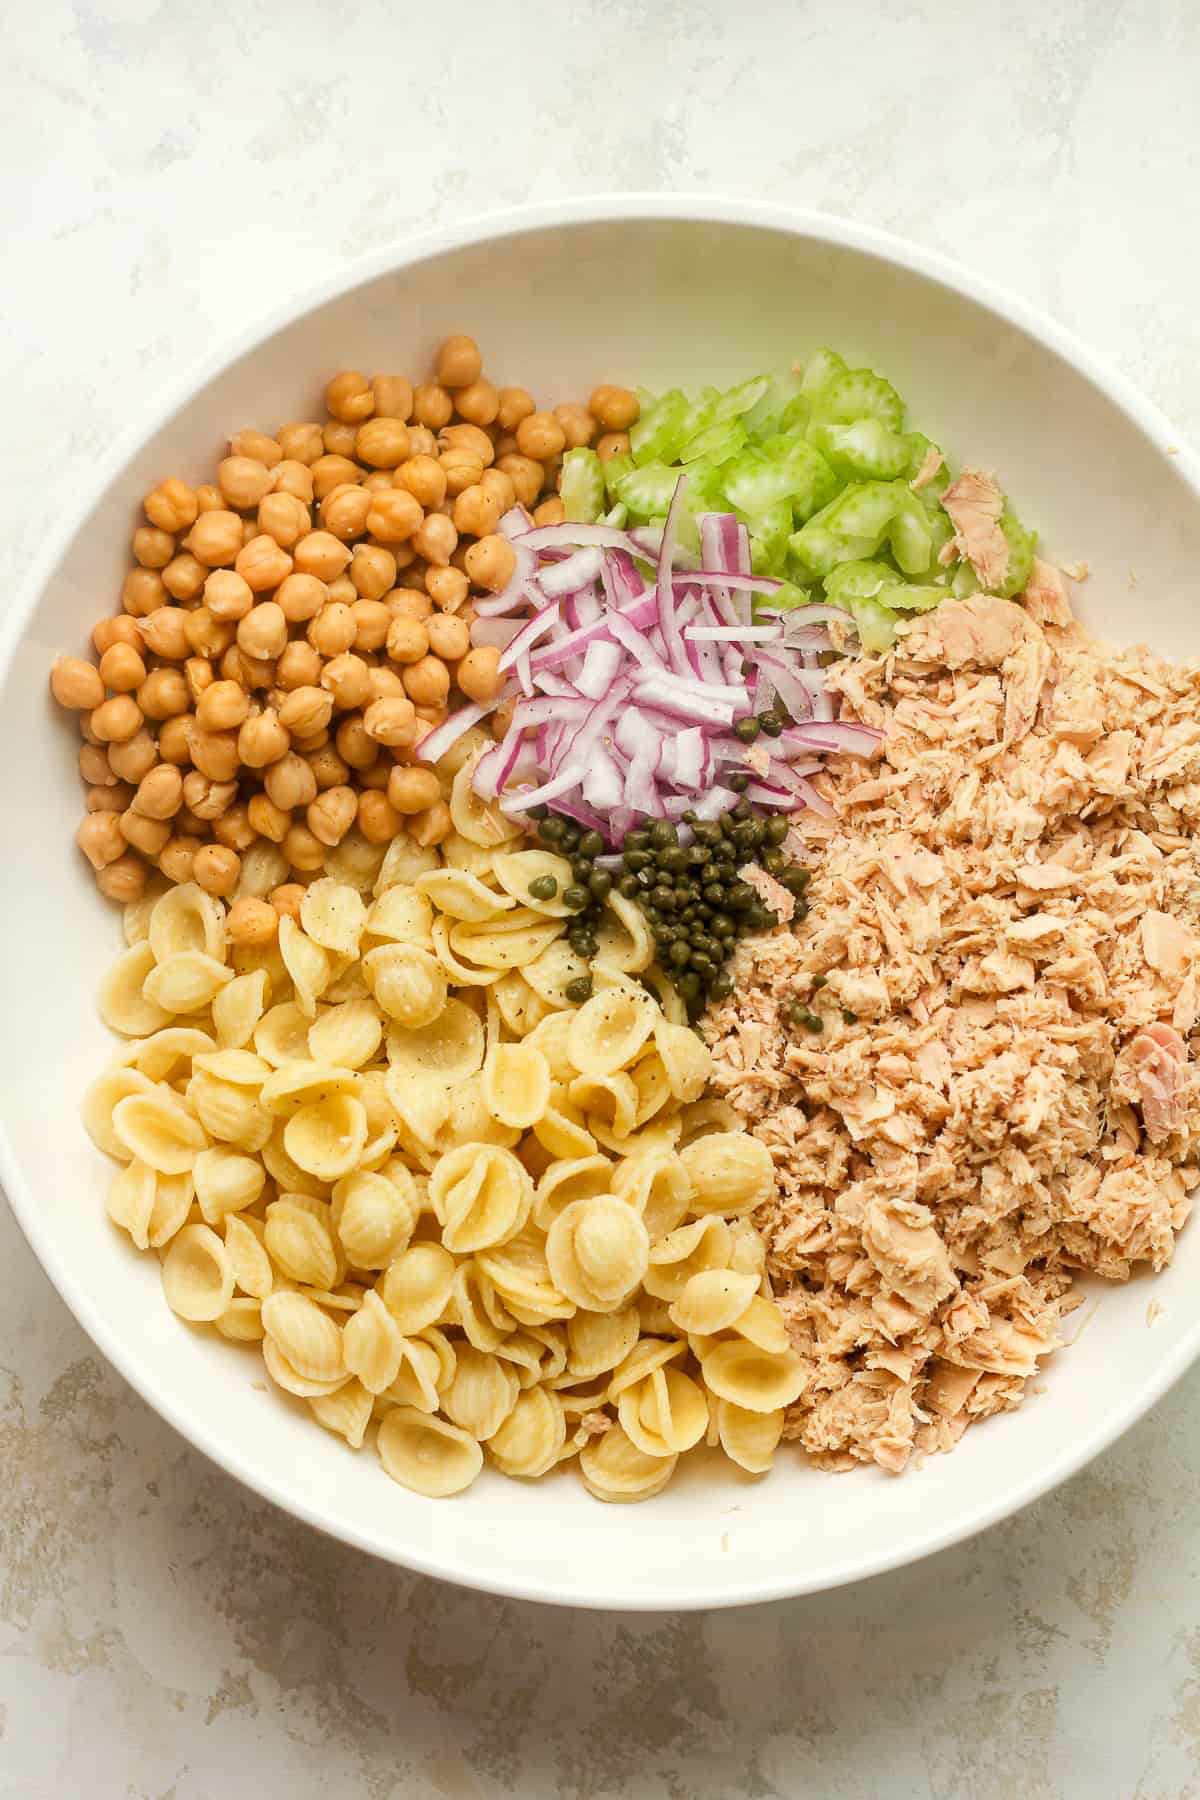 A large bowl of the pasta salad ingredients separated by ingredient.